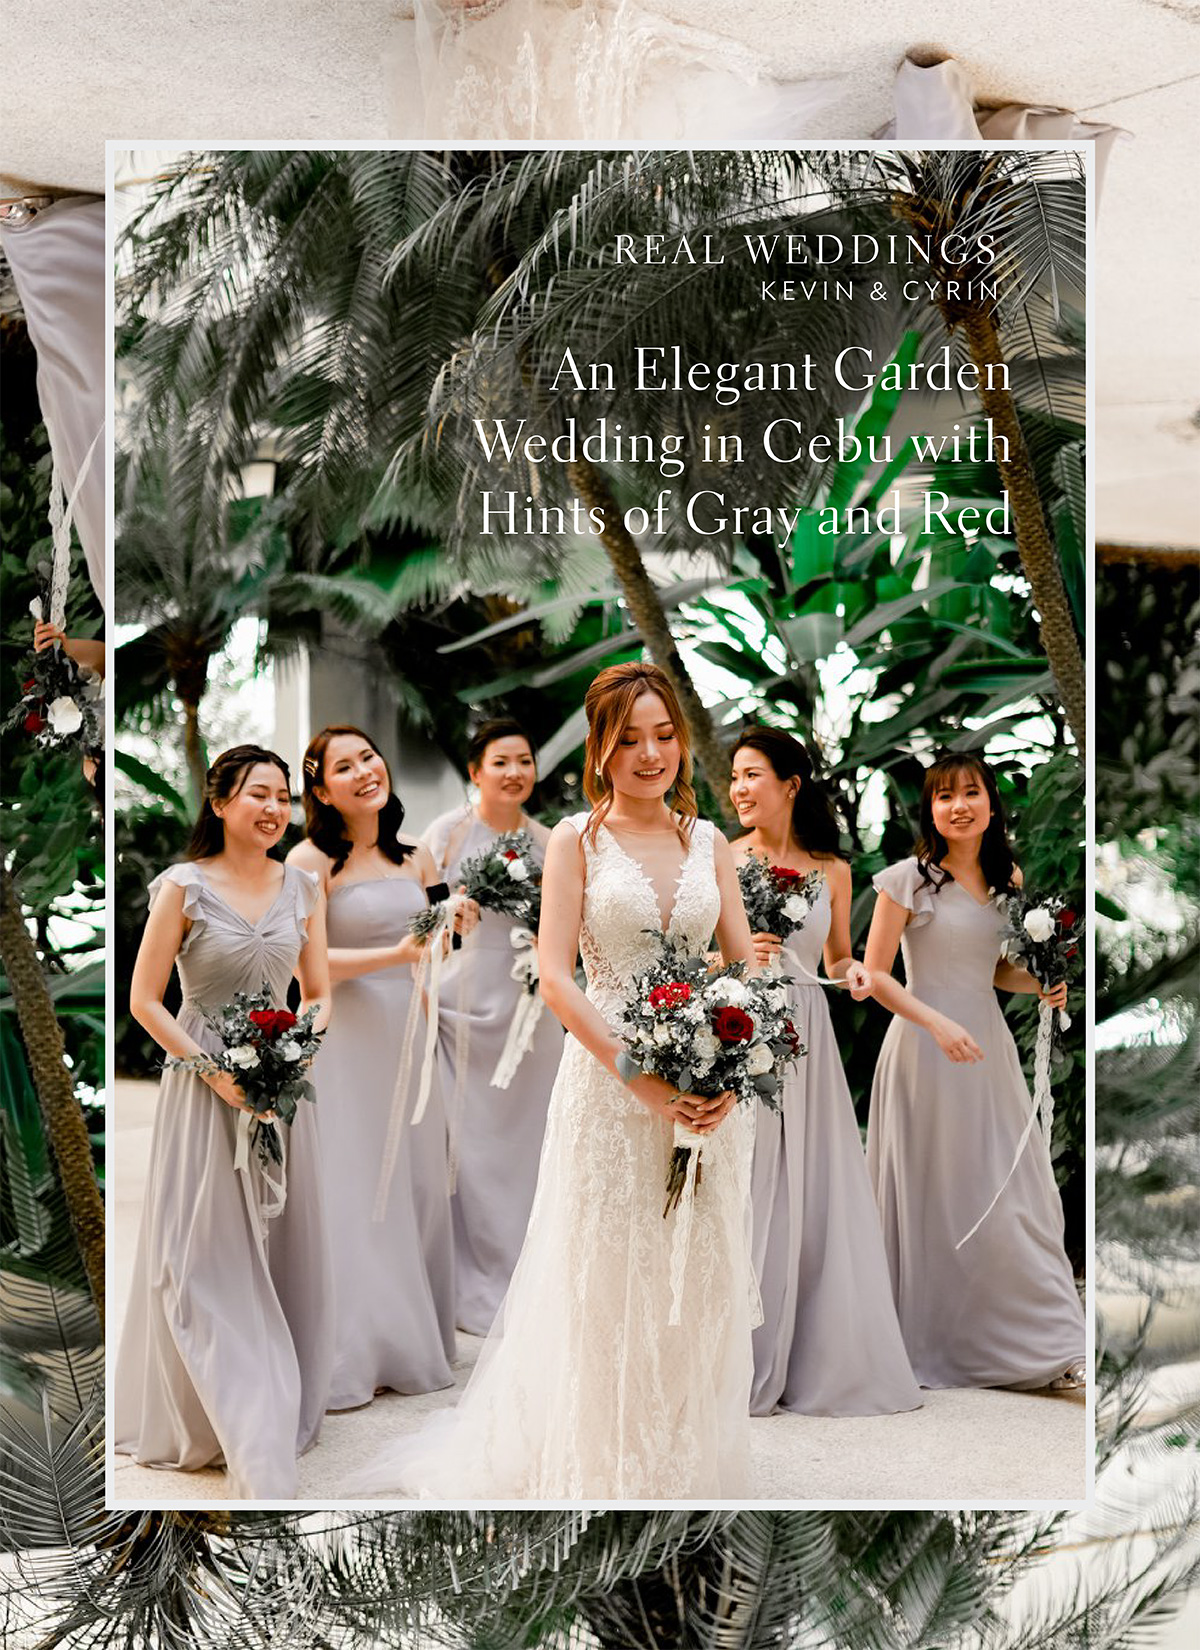 An Elegant Garden Wedding in Cebu with Hints of Gray and Red